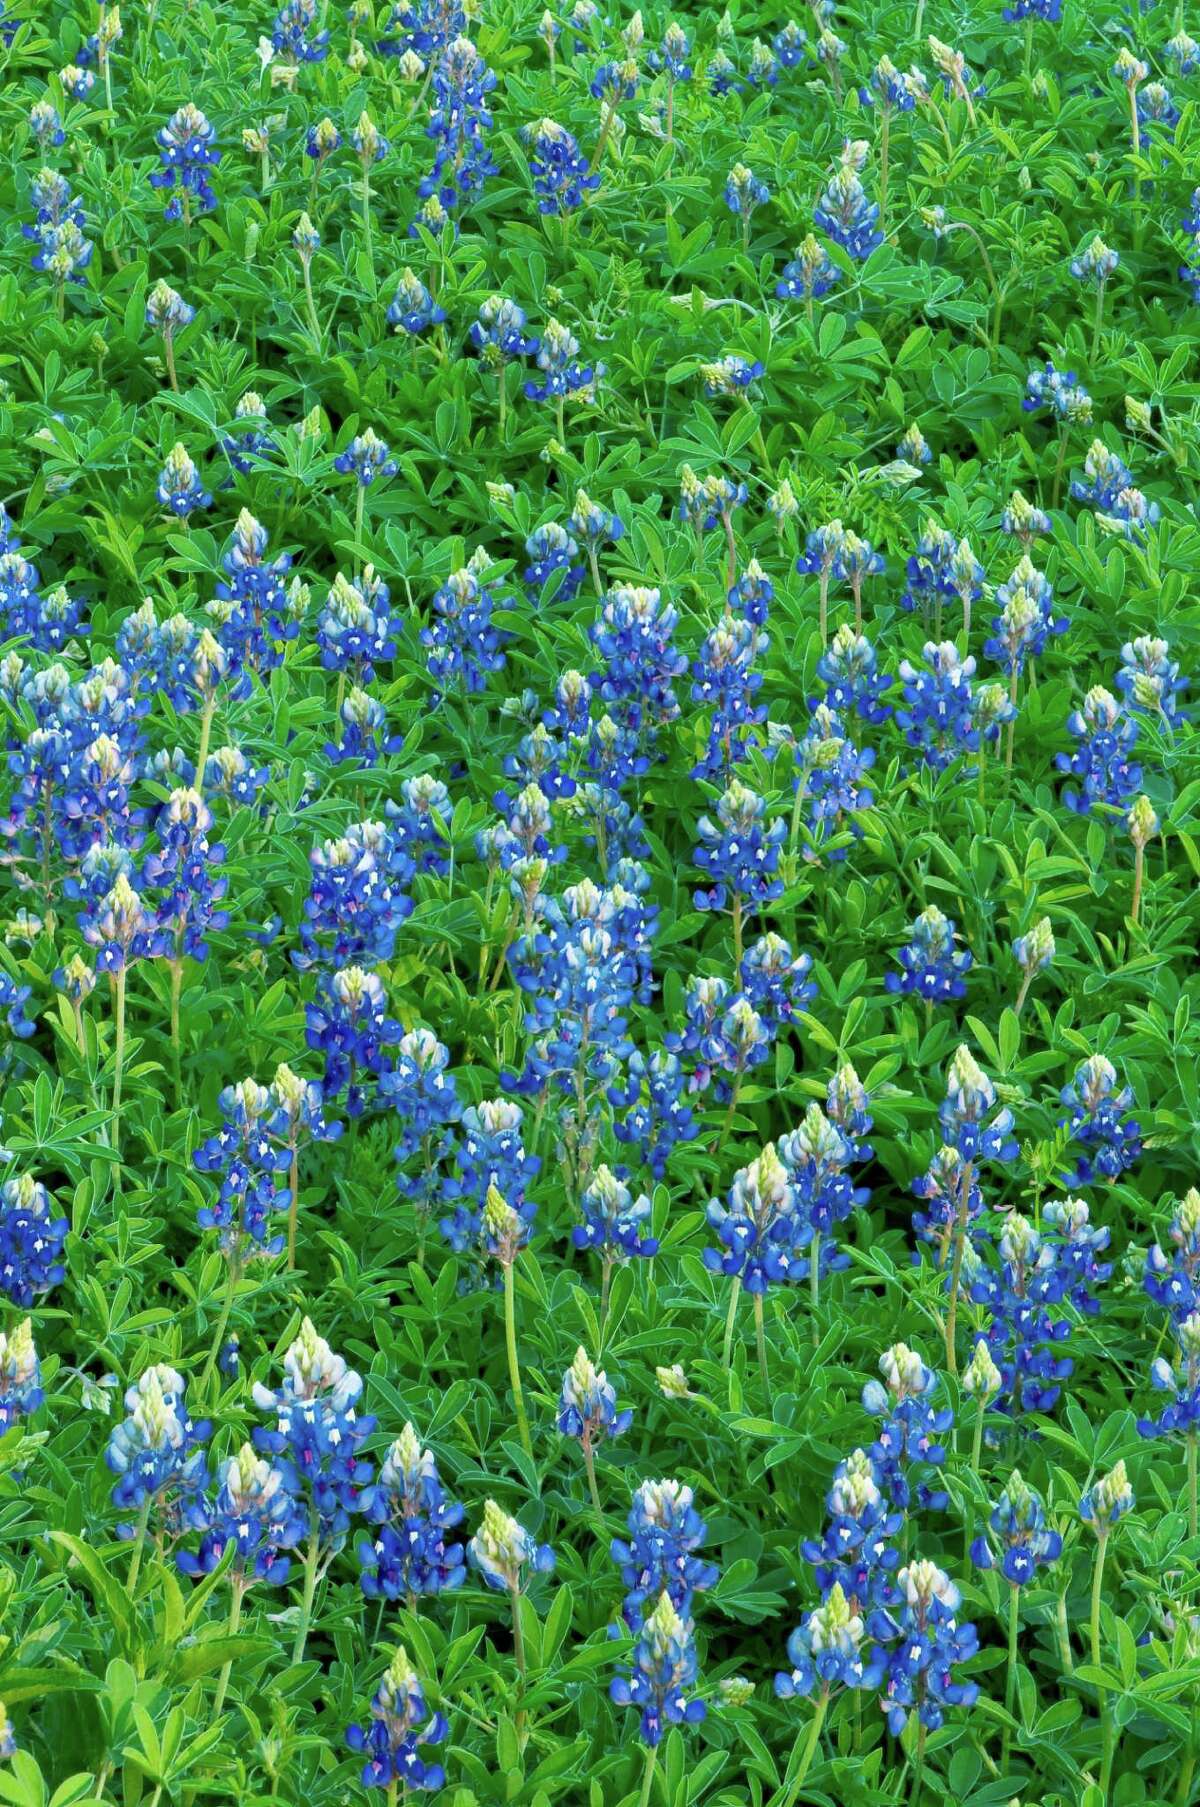 Bluebonnets are back: Here's what you should know